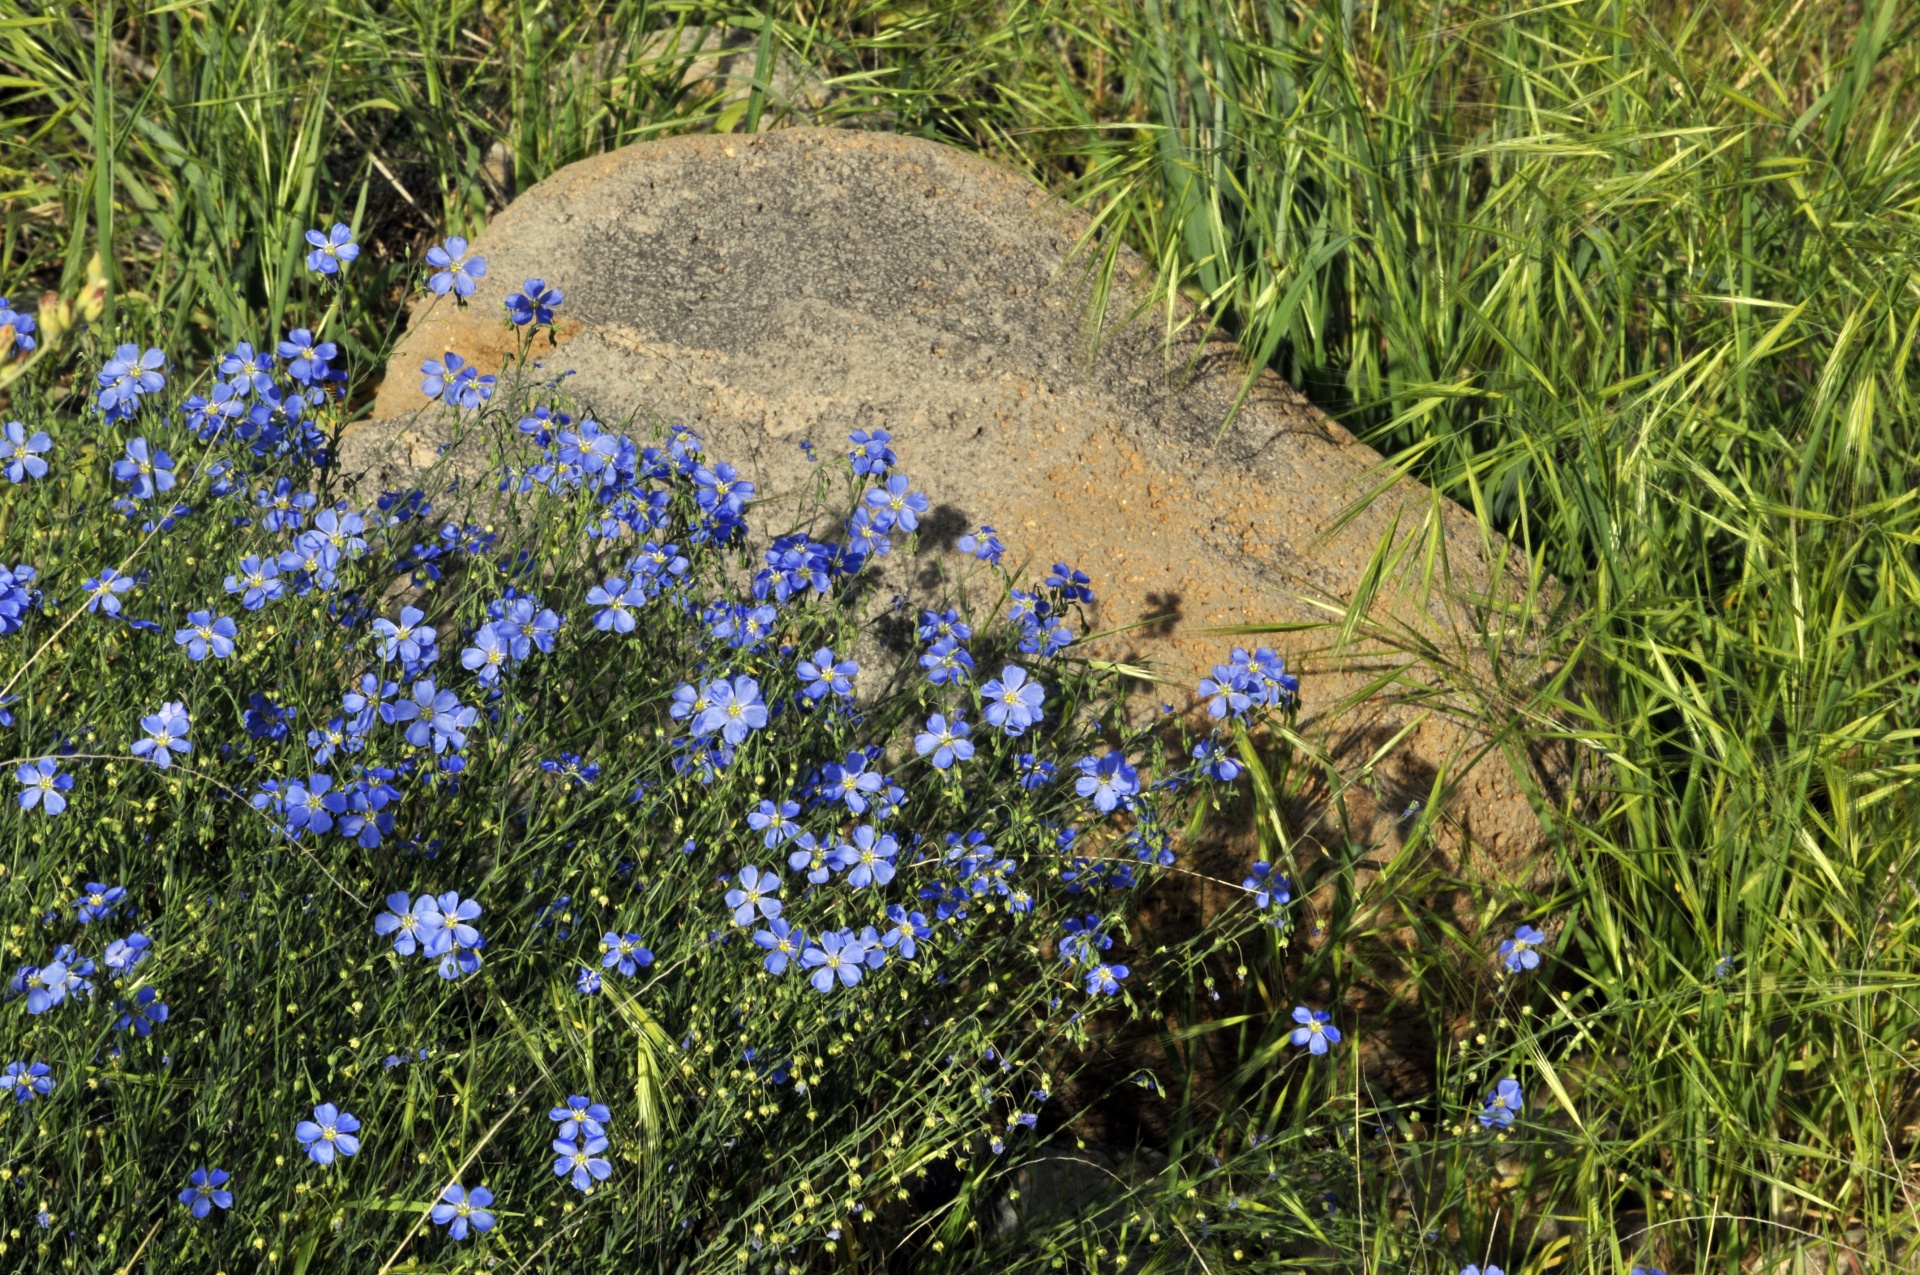 Blue Flowers And A Rock